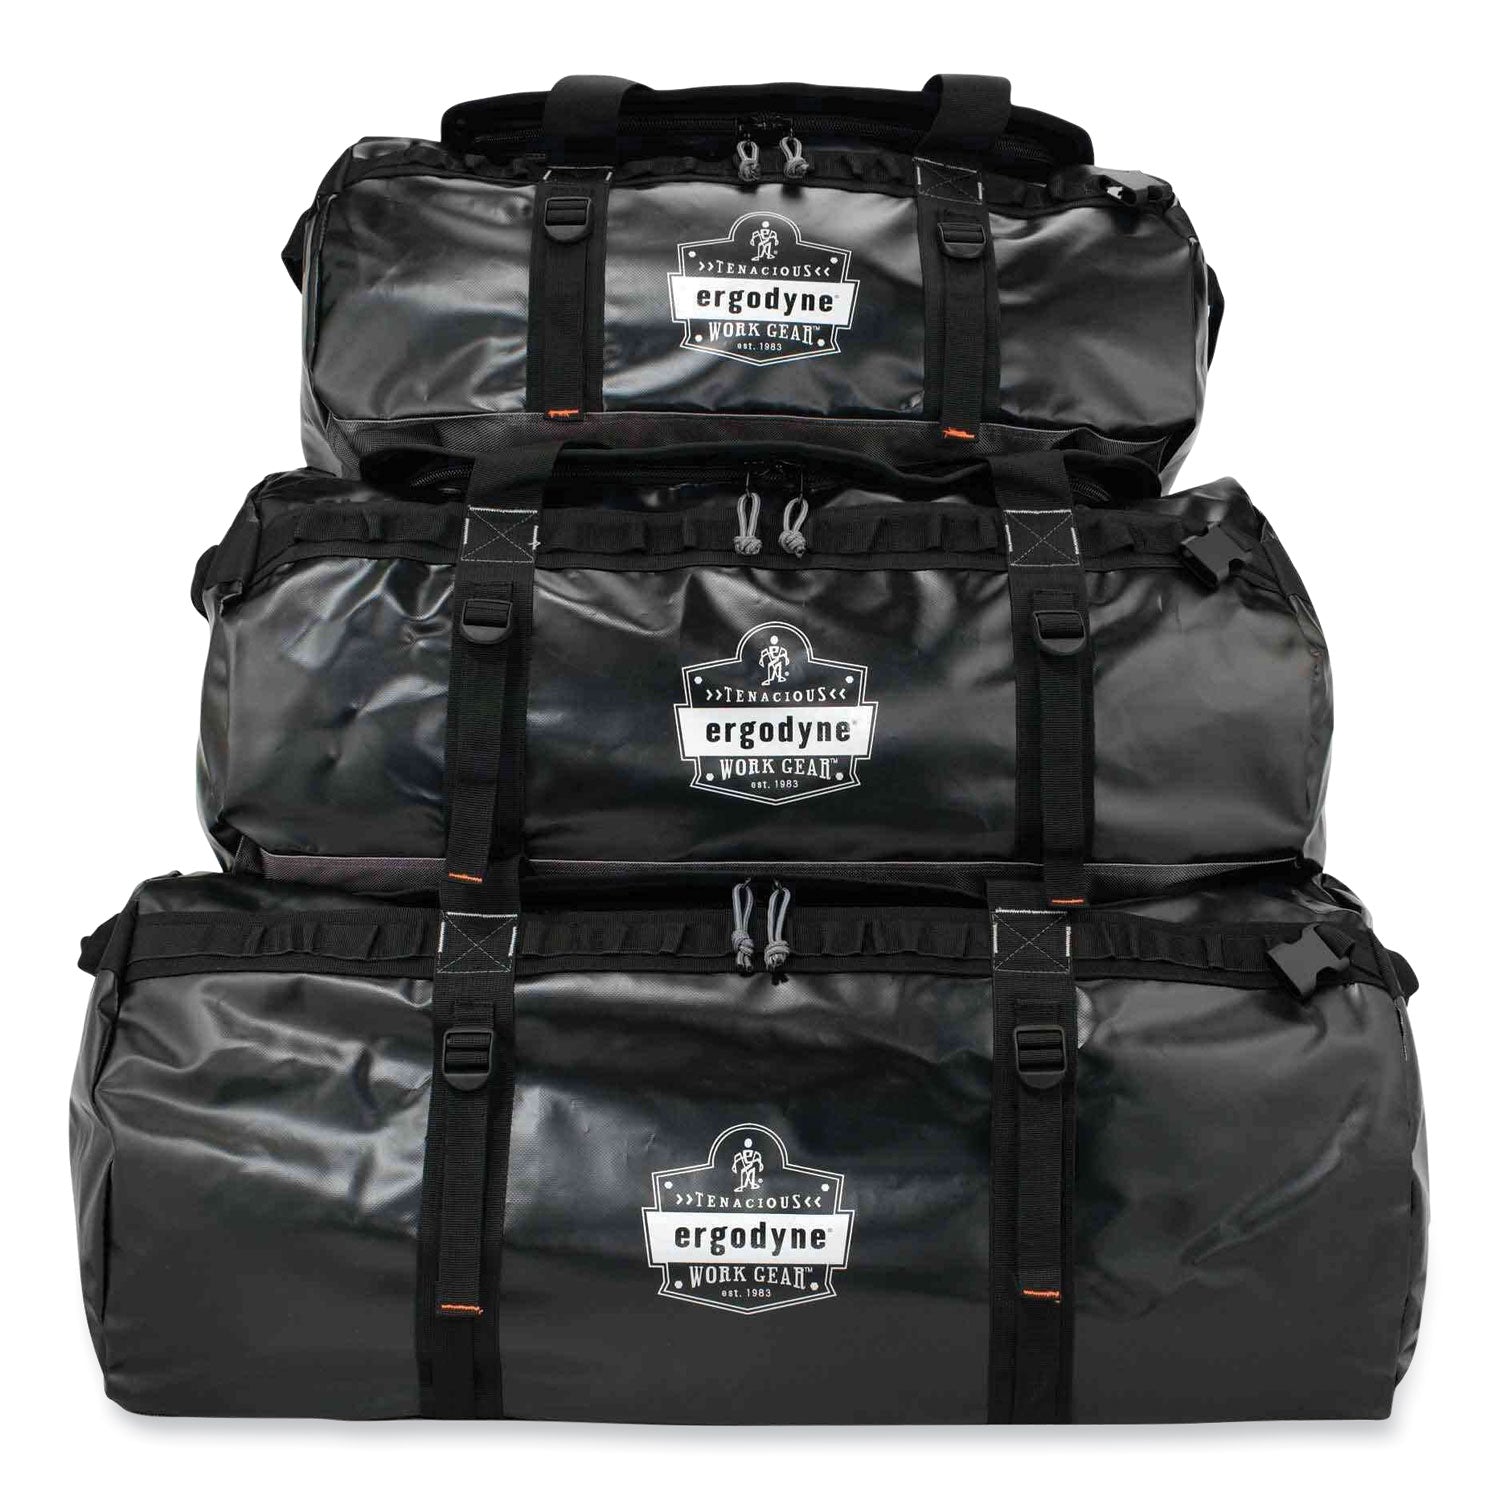 arsenal-5030-water-resistant-duffel-bag-small-135-x-235-x-135-black-ships-in-1-3-business-days_ego13030 - 4